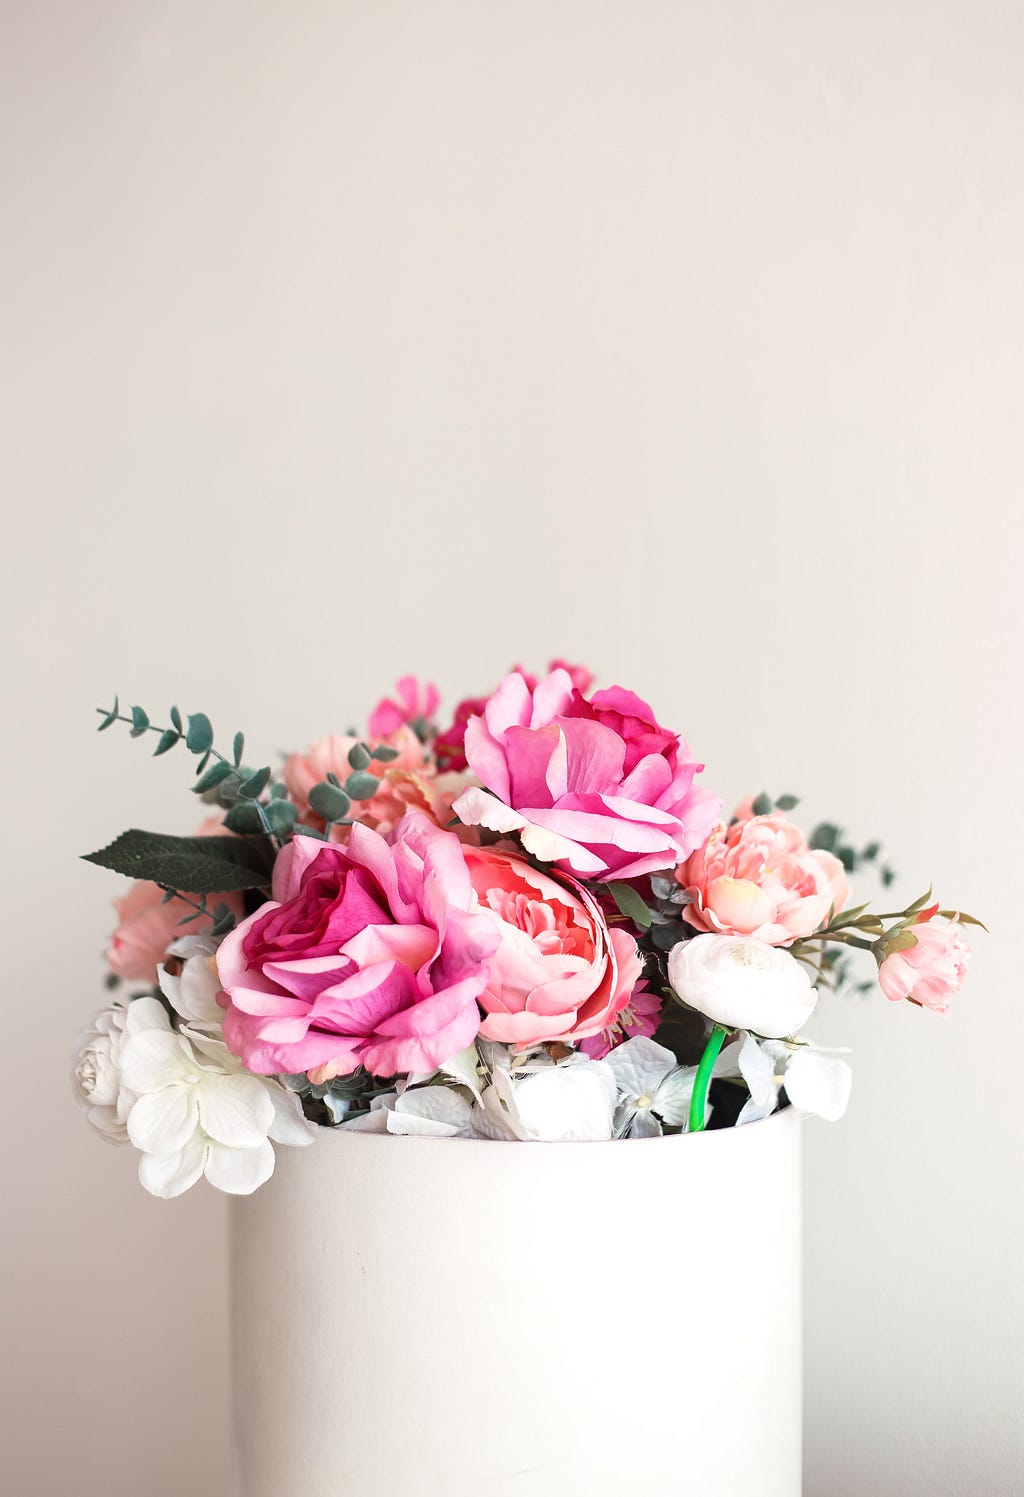 A bouquet of mostly pink and some white flowers.